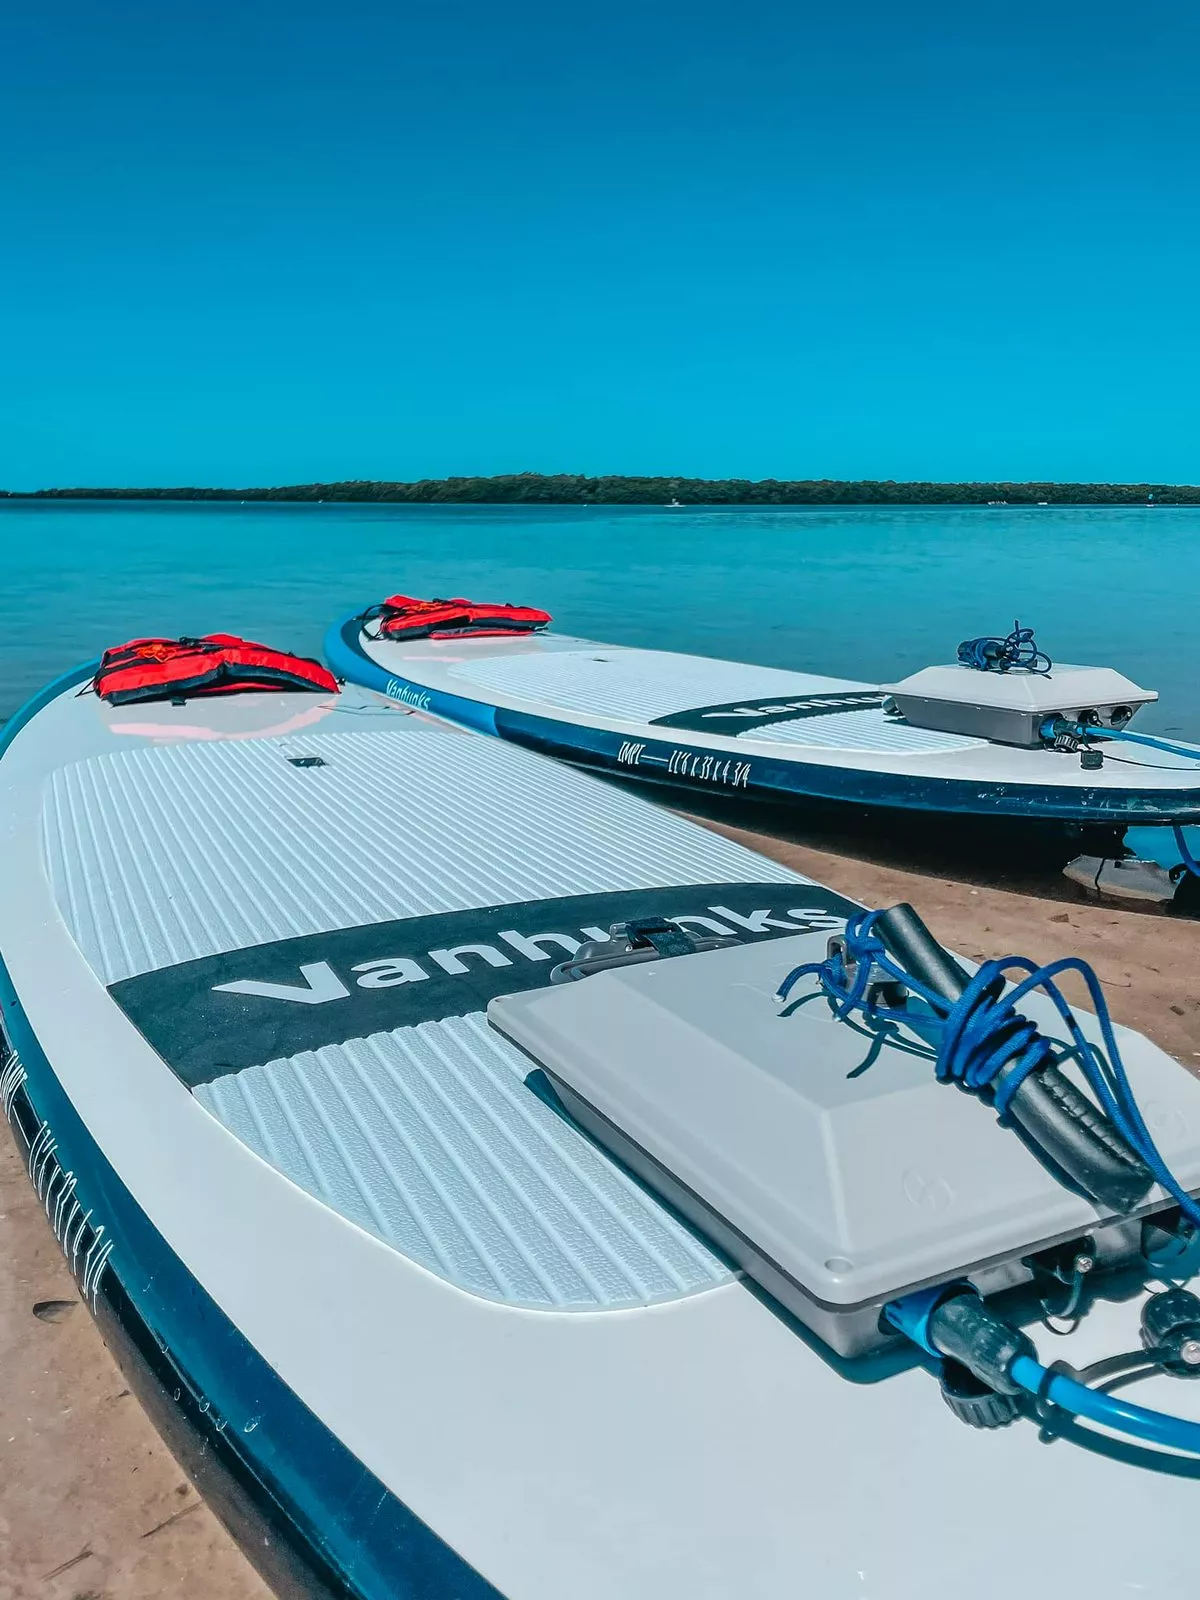 motorized SUP rental in St Pete for a florida bachelorette